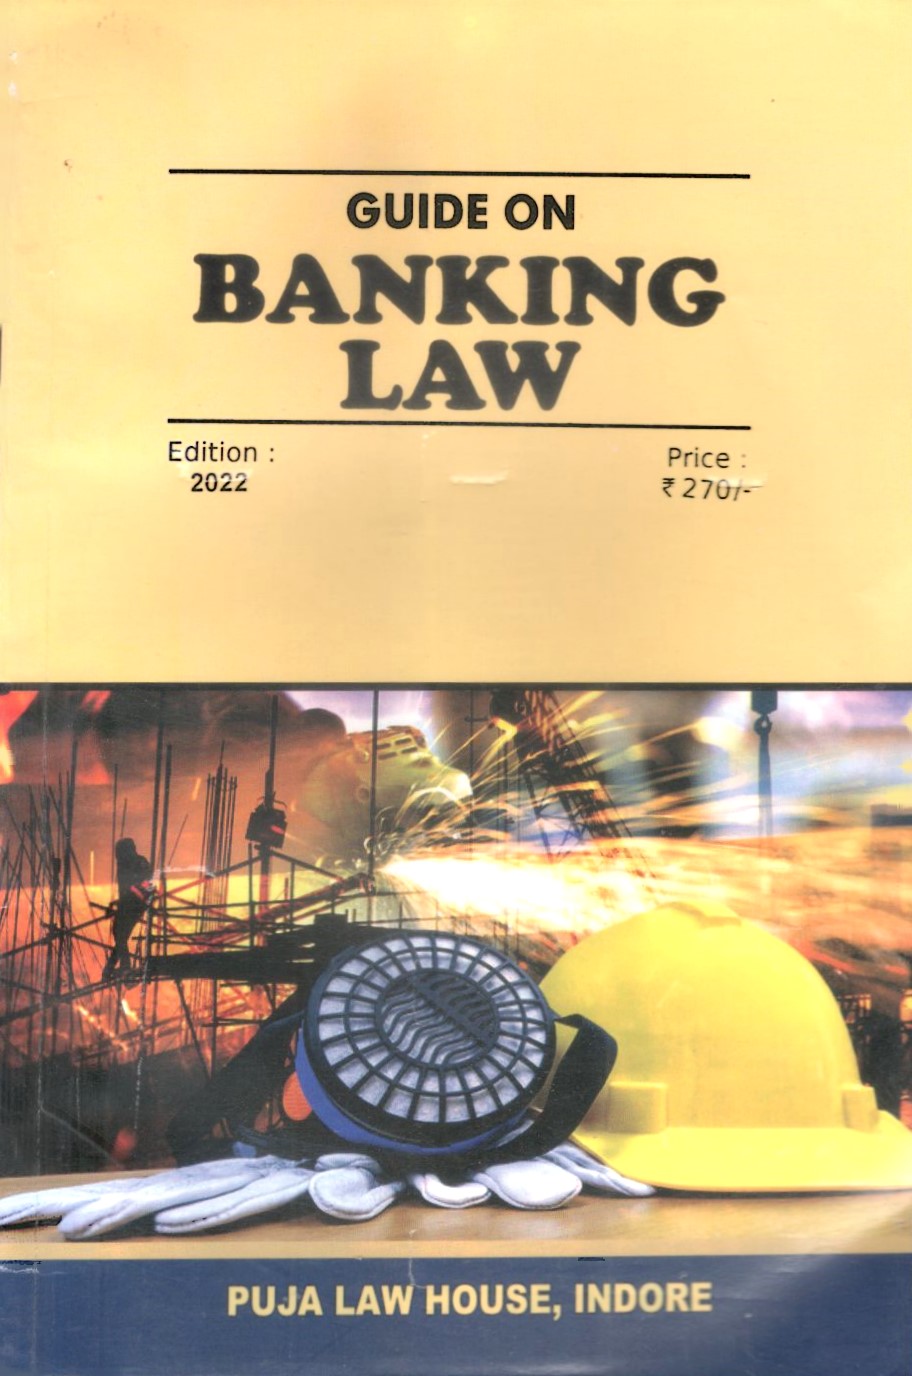 Guide on Banking Law